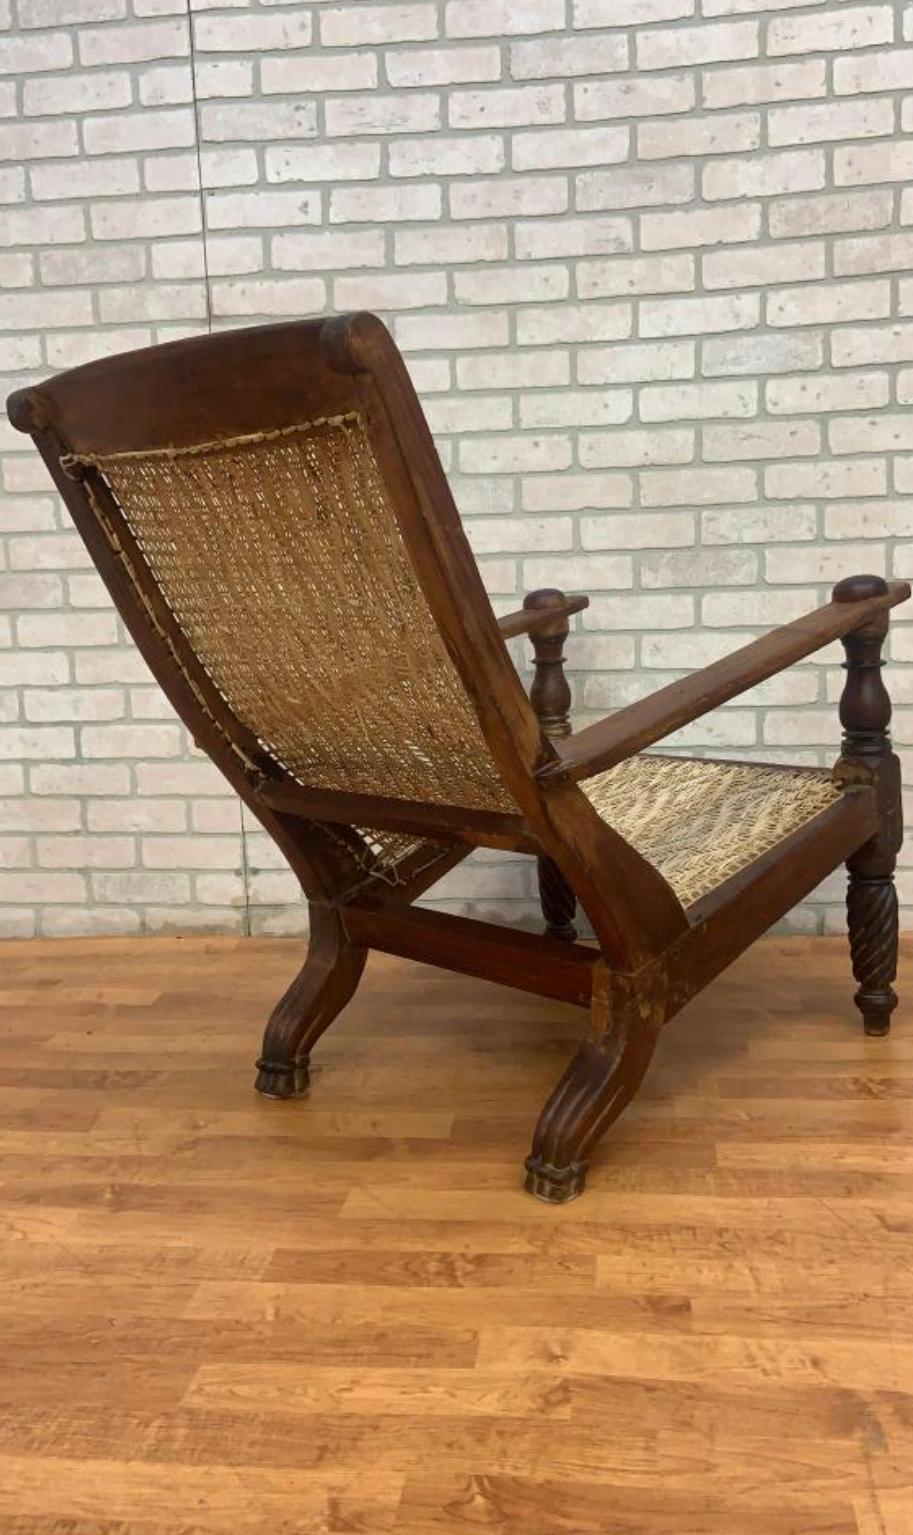 Antique Woven Back British Colonial Plantation Tea Chair

This late 19th Century antique British Colonial plantation tea chair is a great lounge chair sure to heighten any decor. The chair has beautifully carved legs and an arched woven rattan